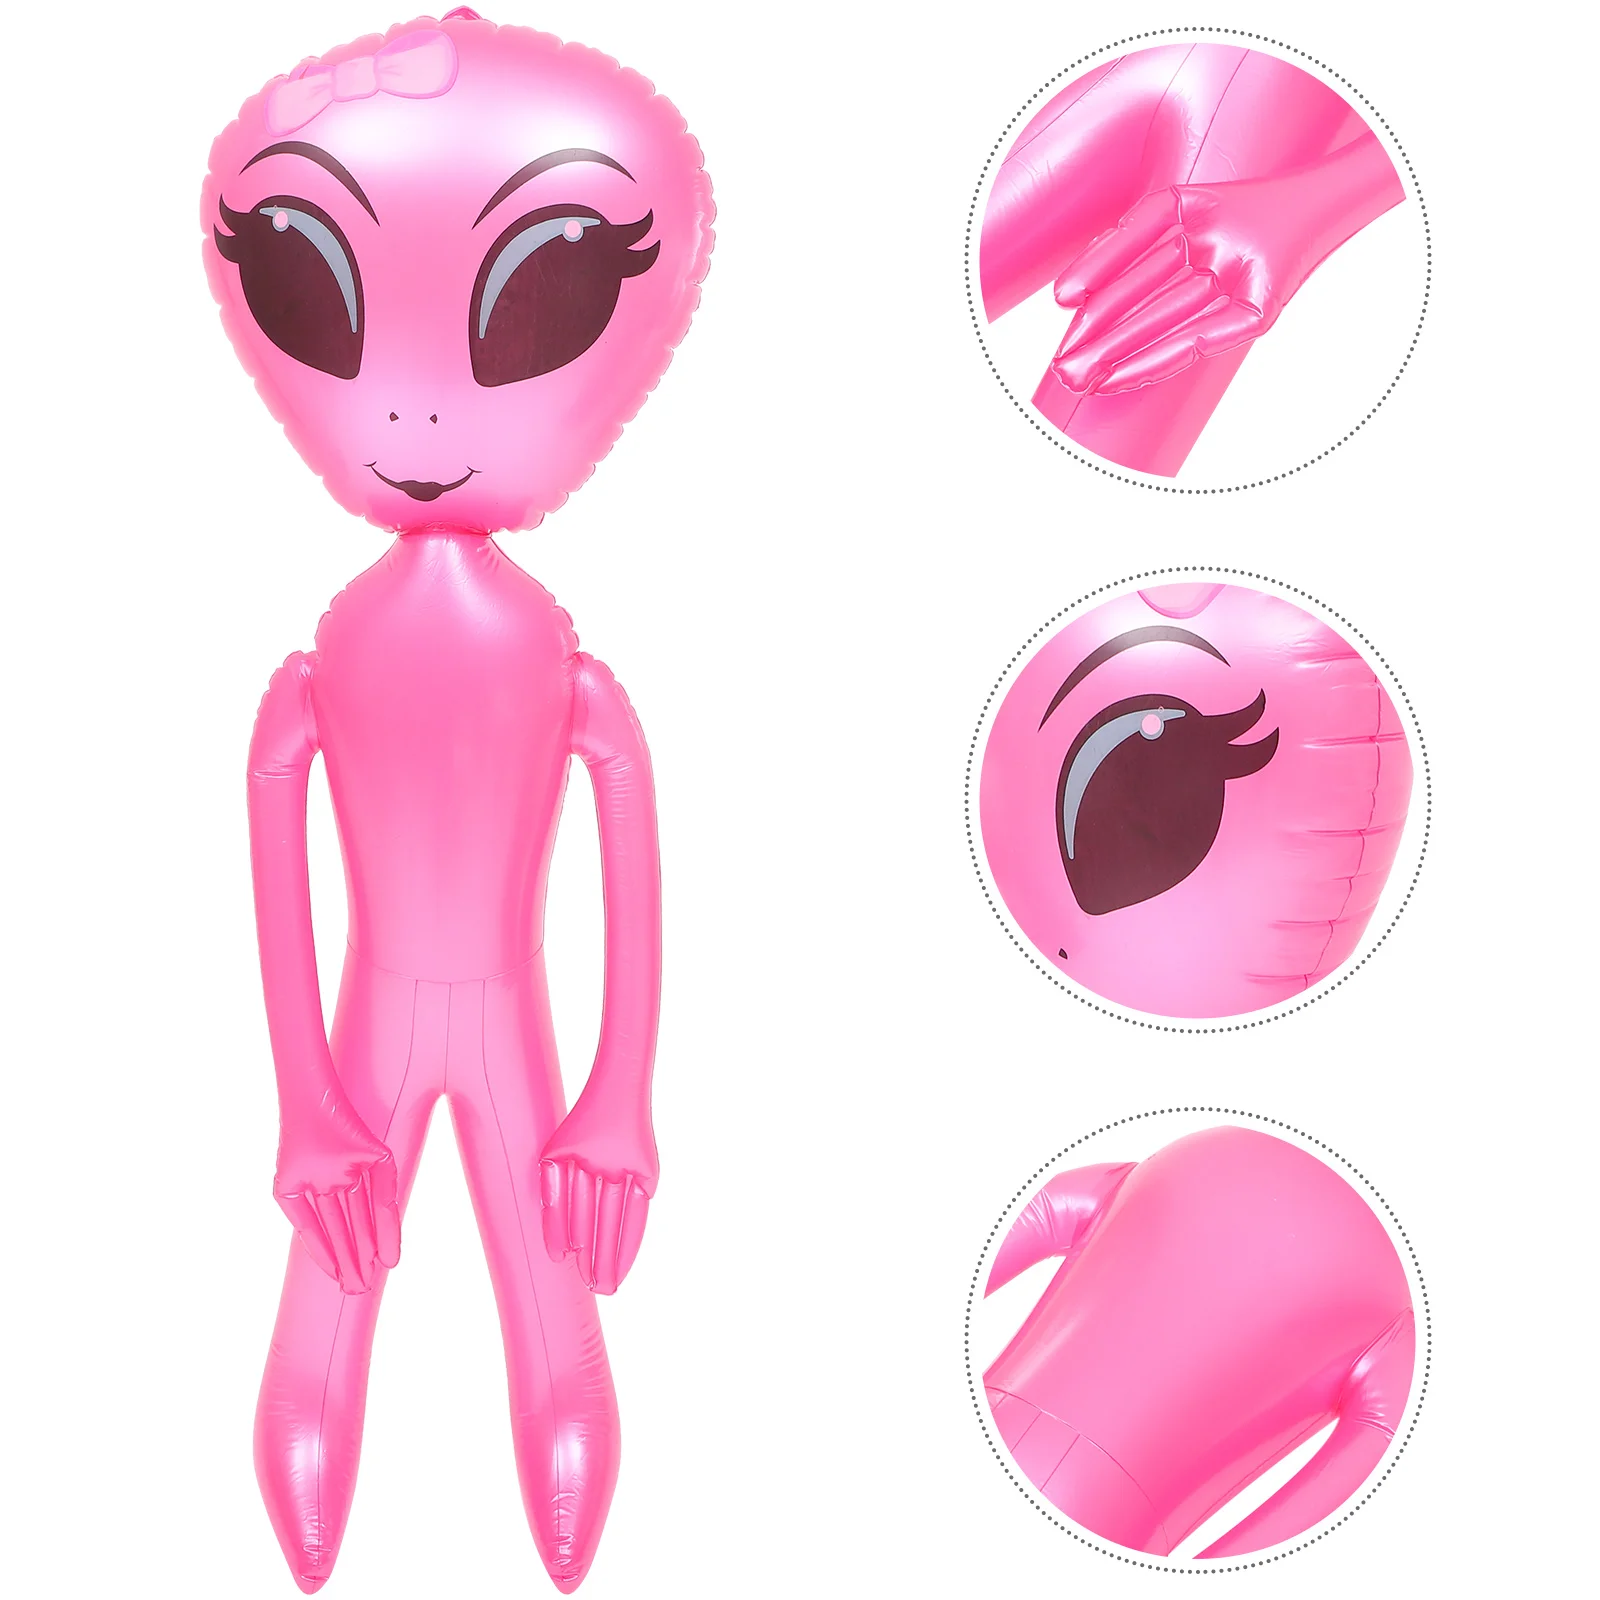 

Kids Toy Inflatable Alien Balloon Toys Party Games Balloons Tumbler Halloween Props Alien-Shaped Child